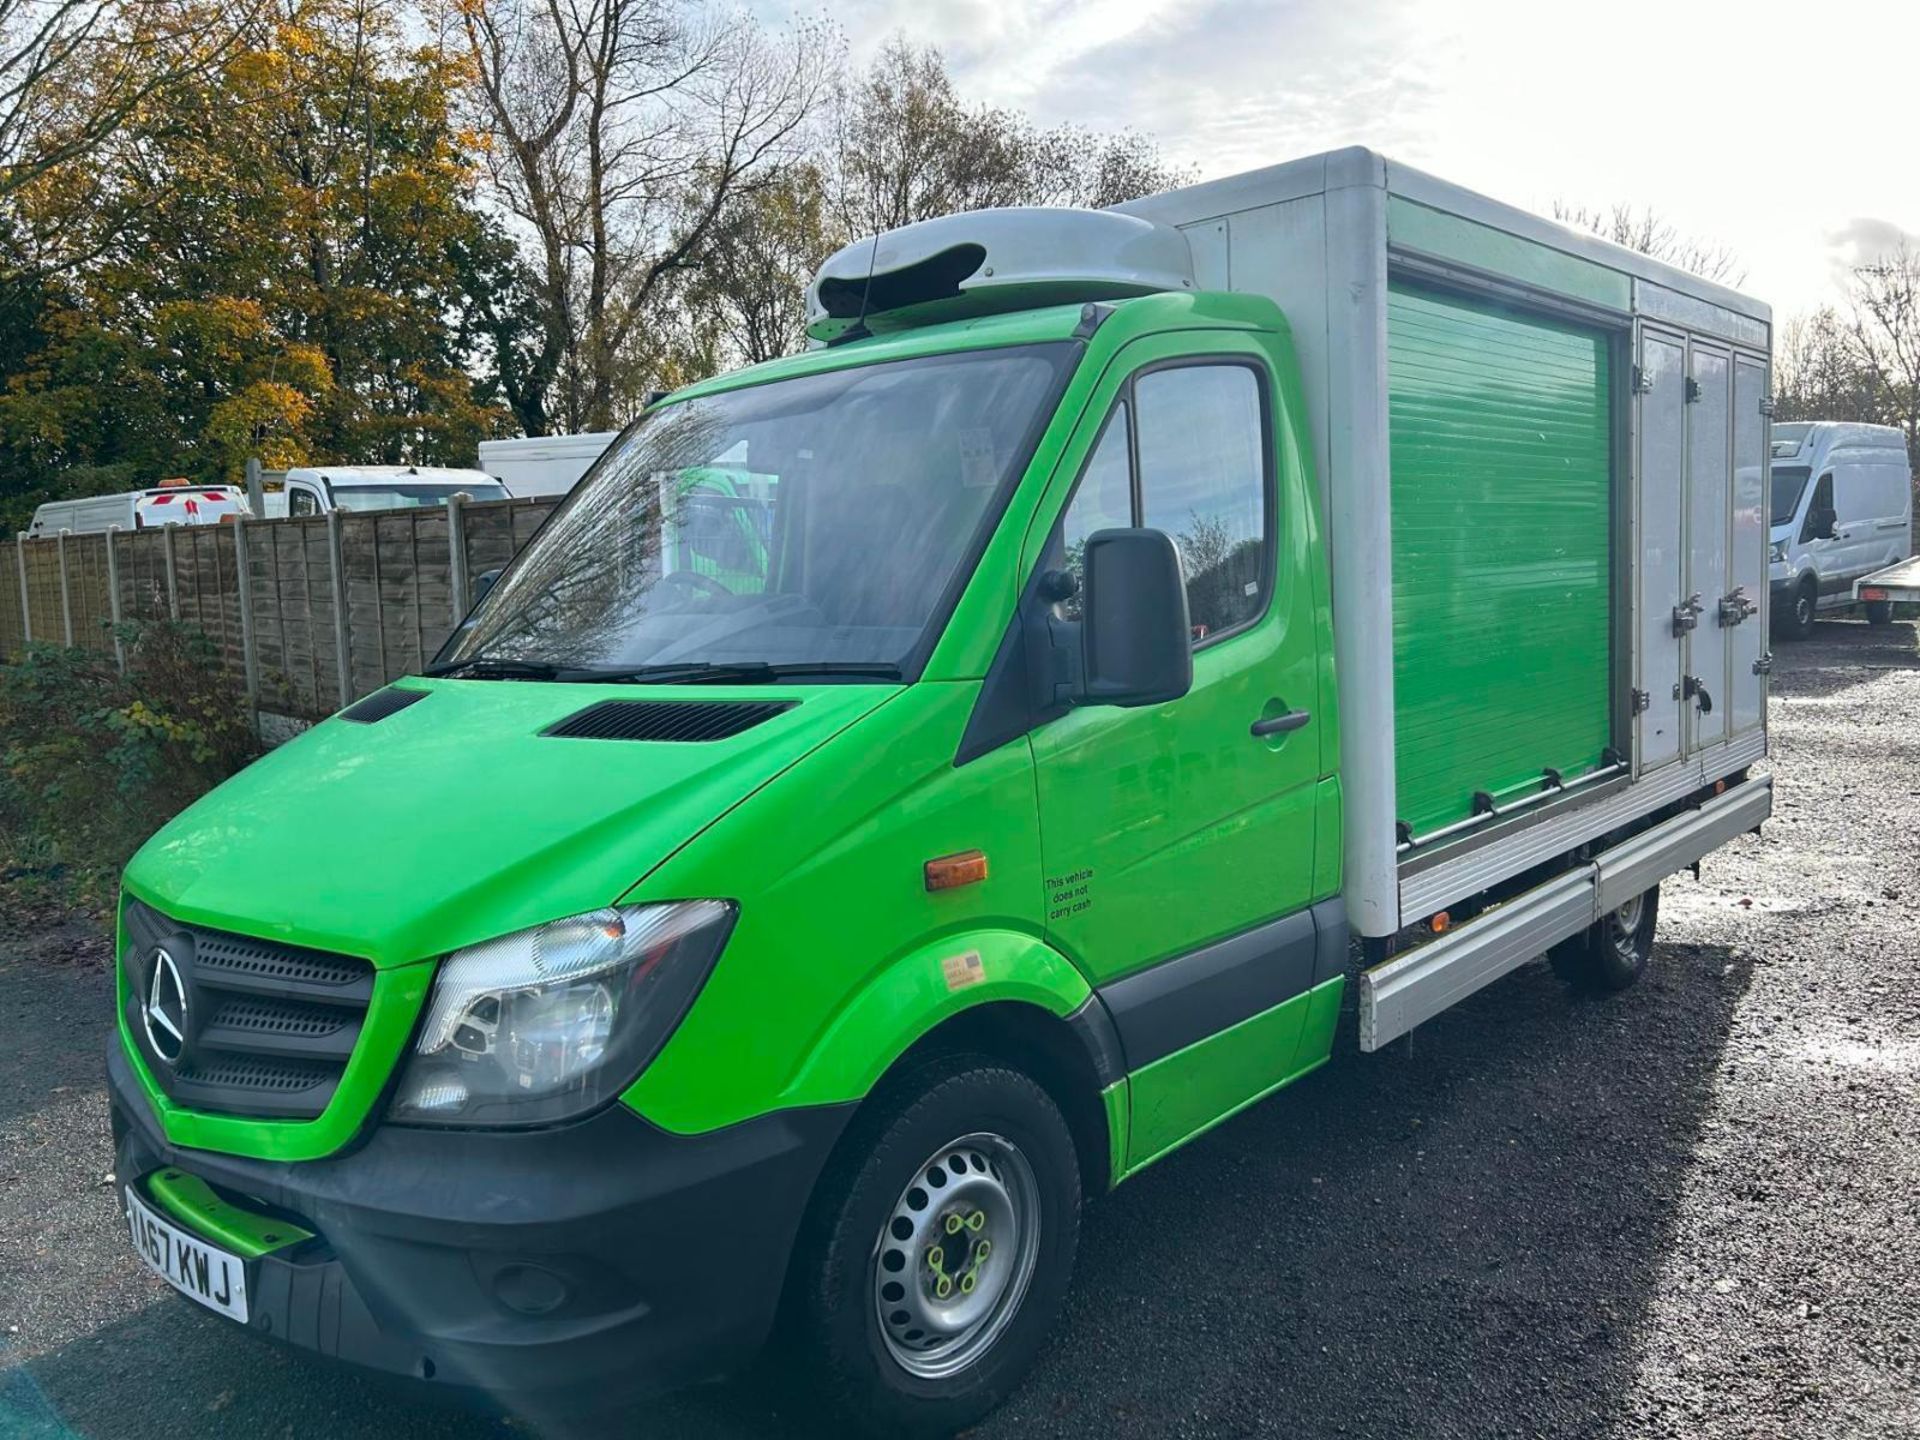 >>>SPECIAL CLEARANCE<<< 2017 MERCEDES-BENZ SPRINTER 314 CDI FRIDGE FREEZER CHASSIS CAB